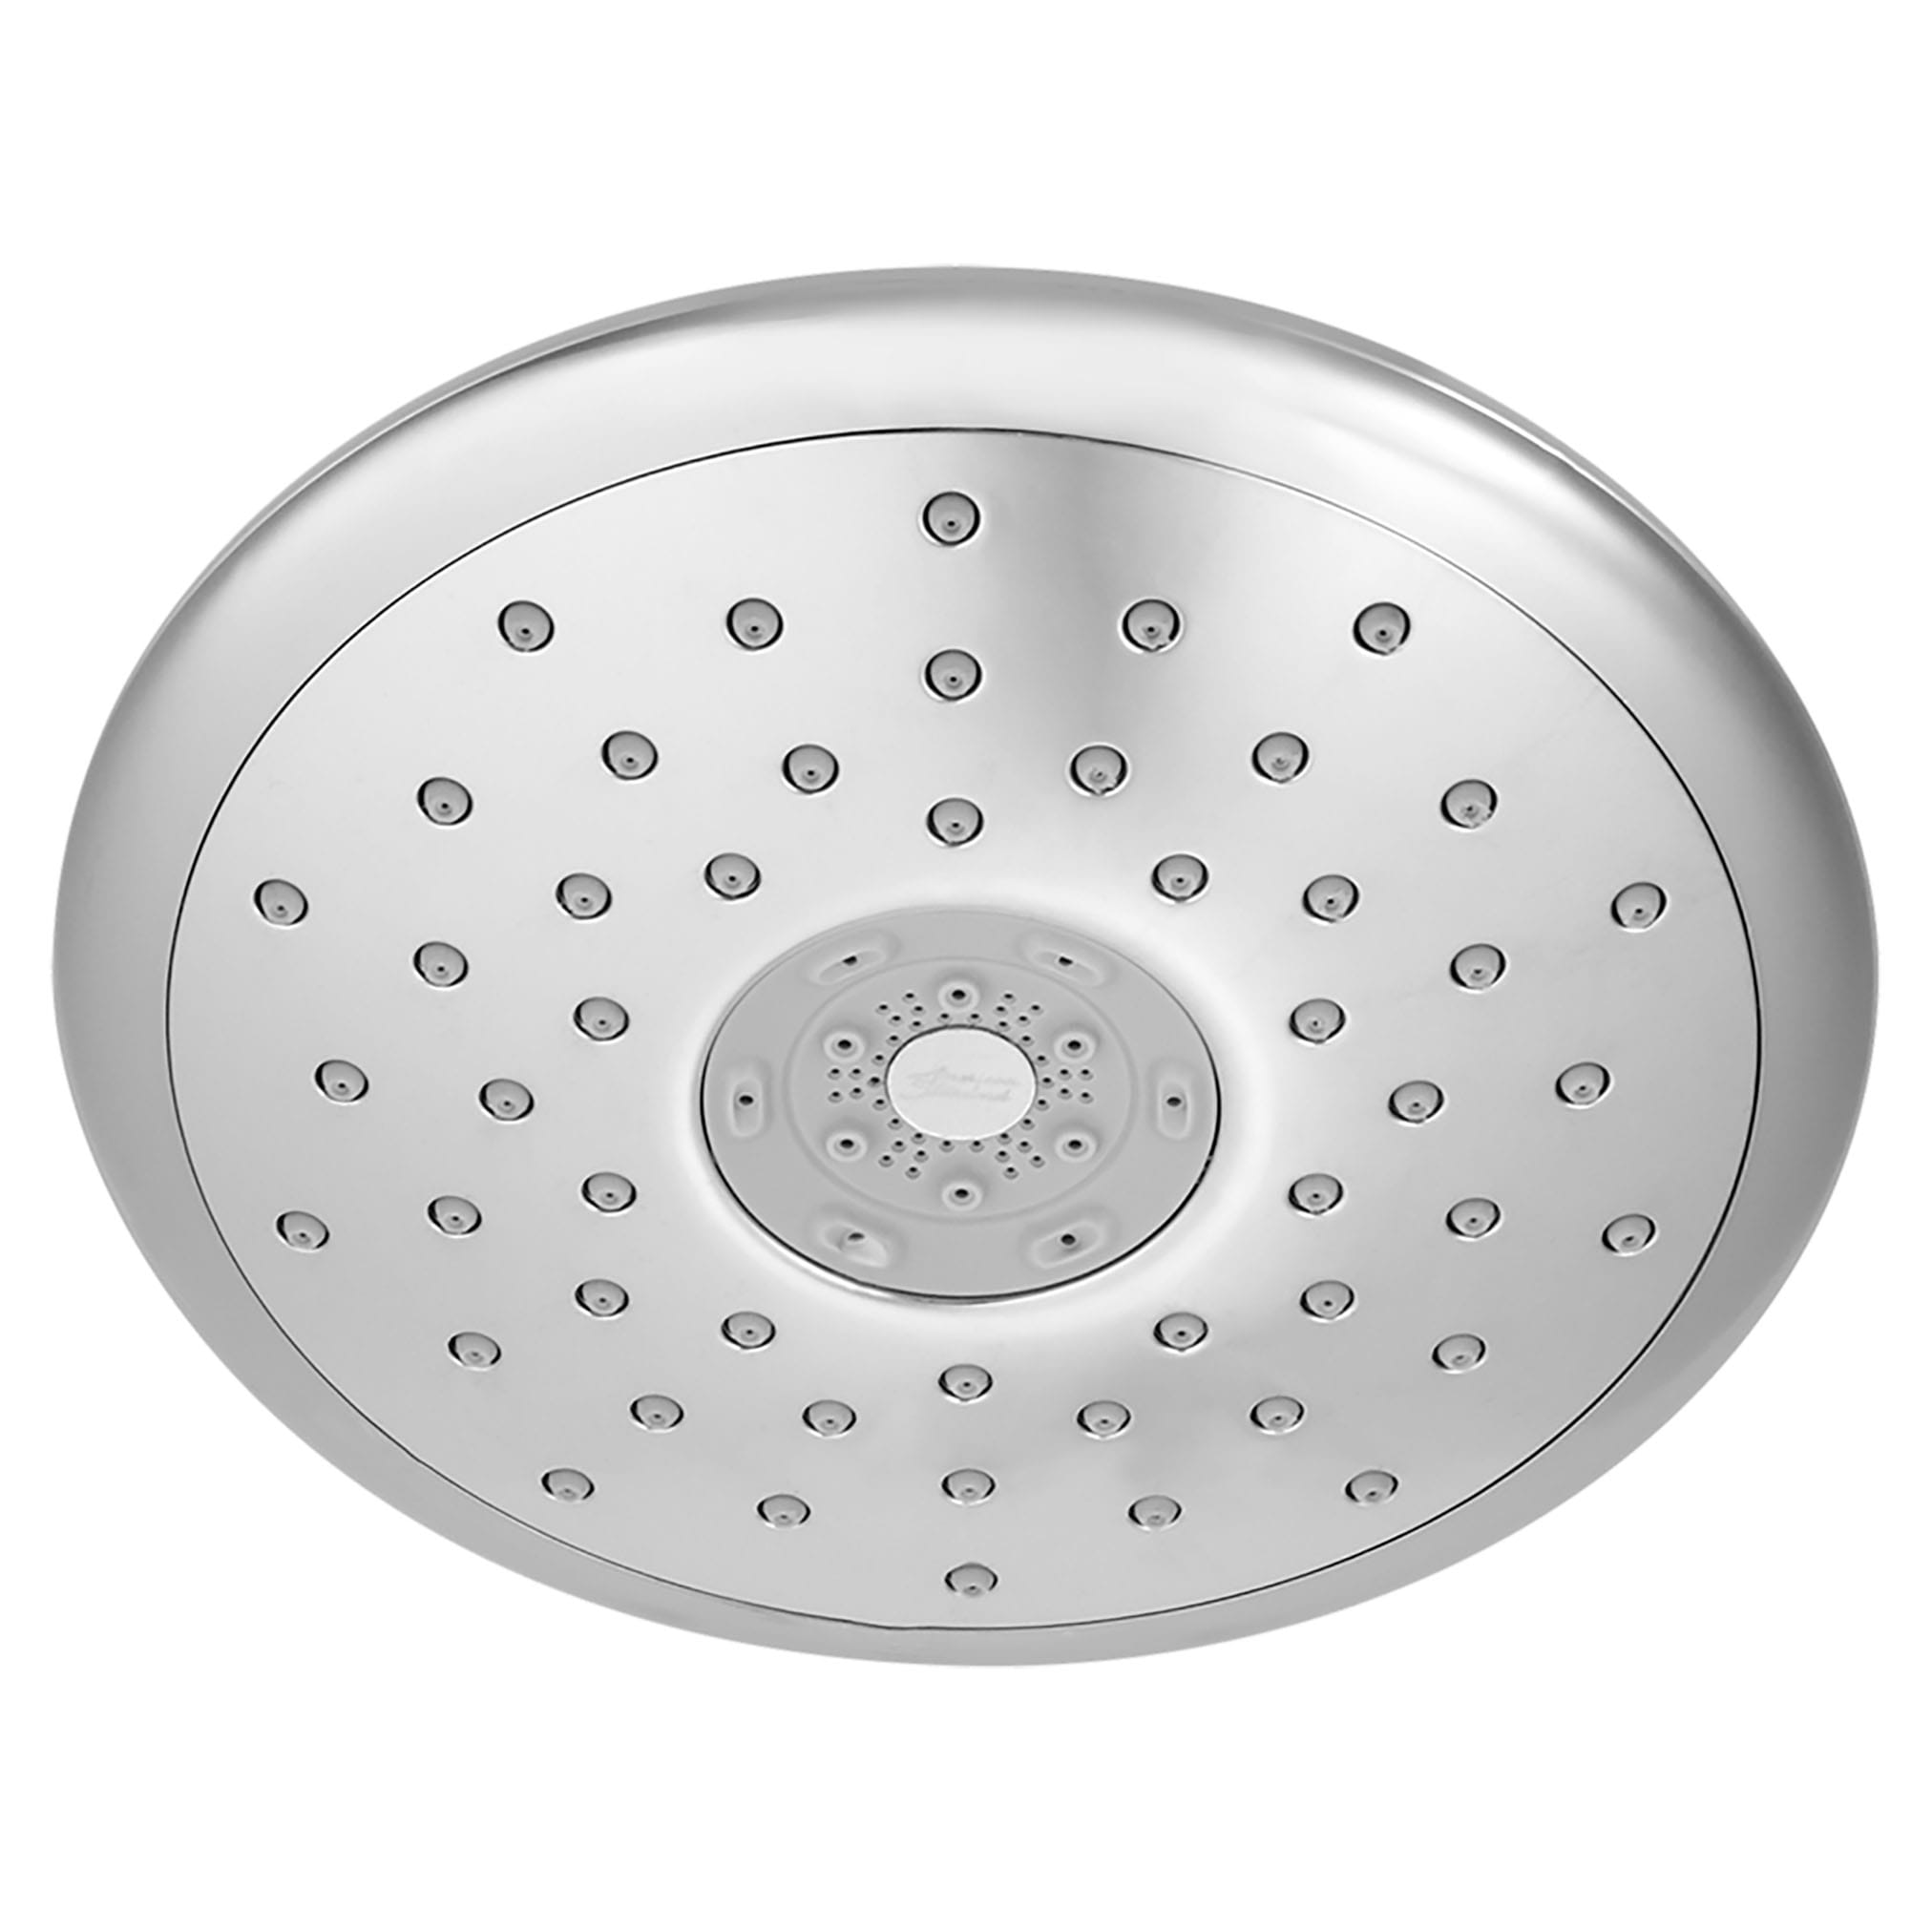 Spectra Touch 7-3/16-in. 1.8 GPM 4-Function Water-Saving Shower Head